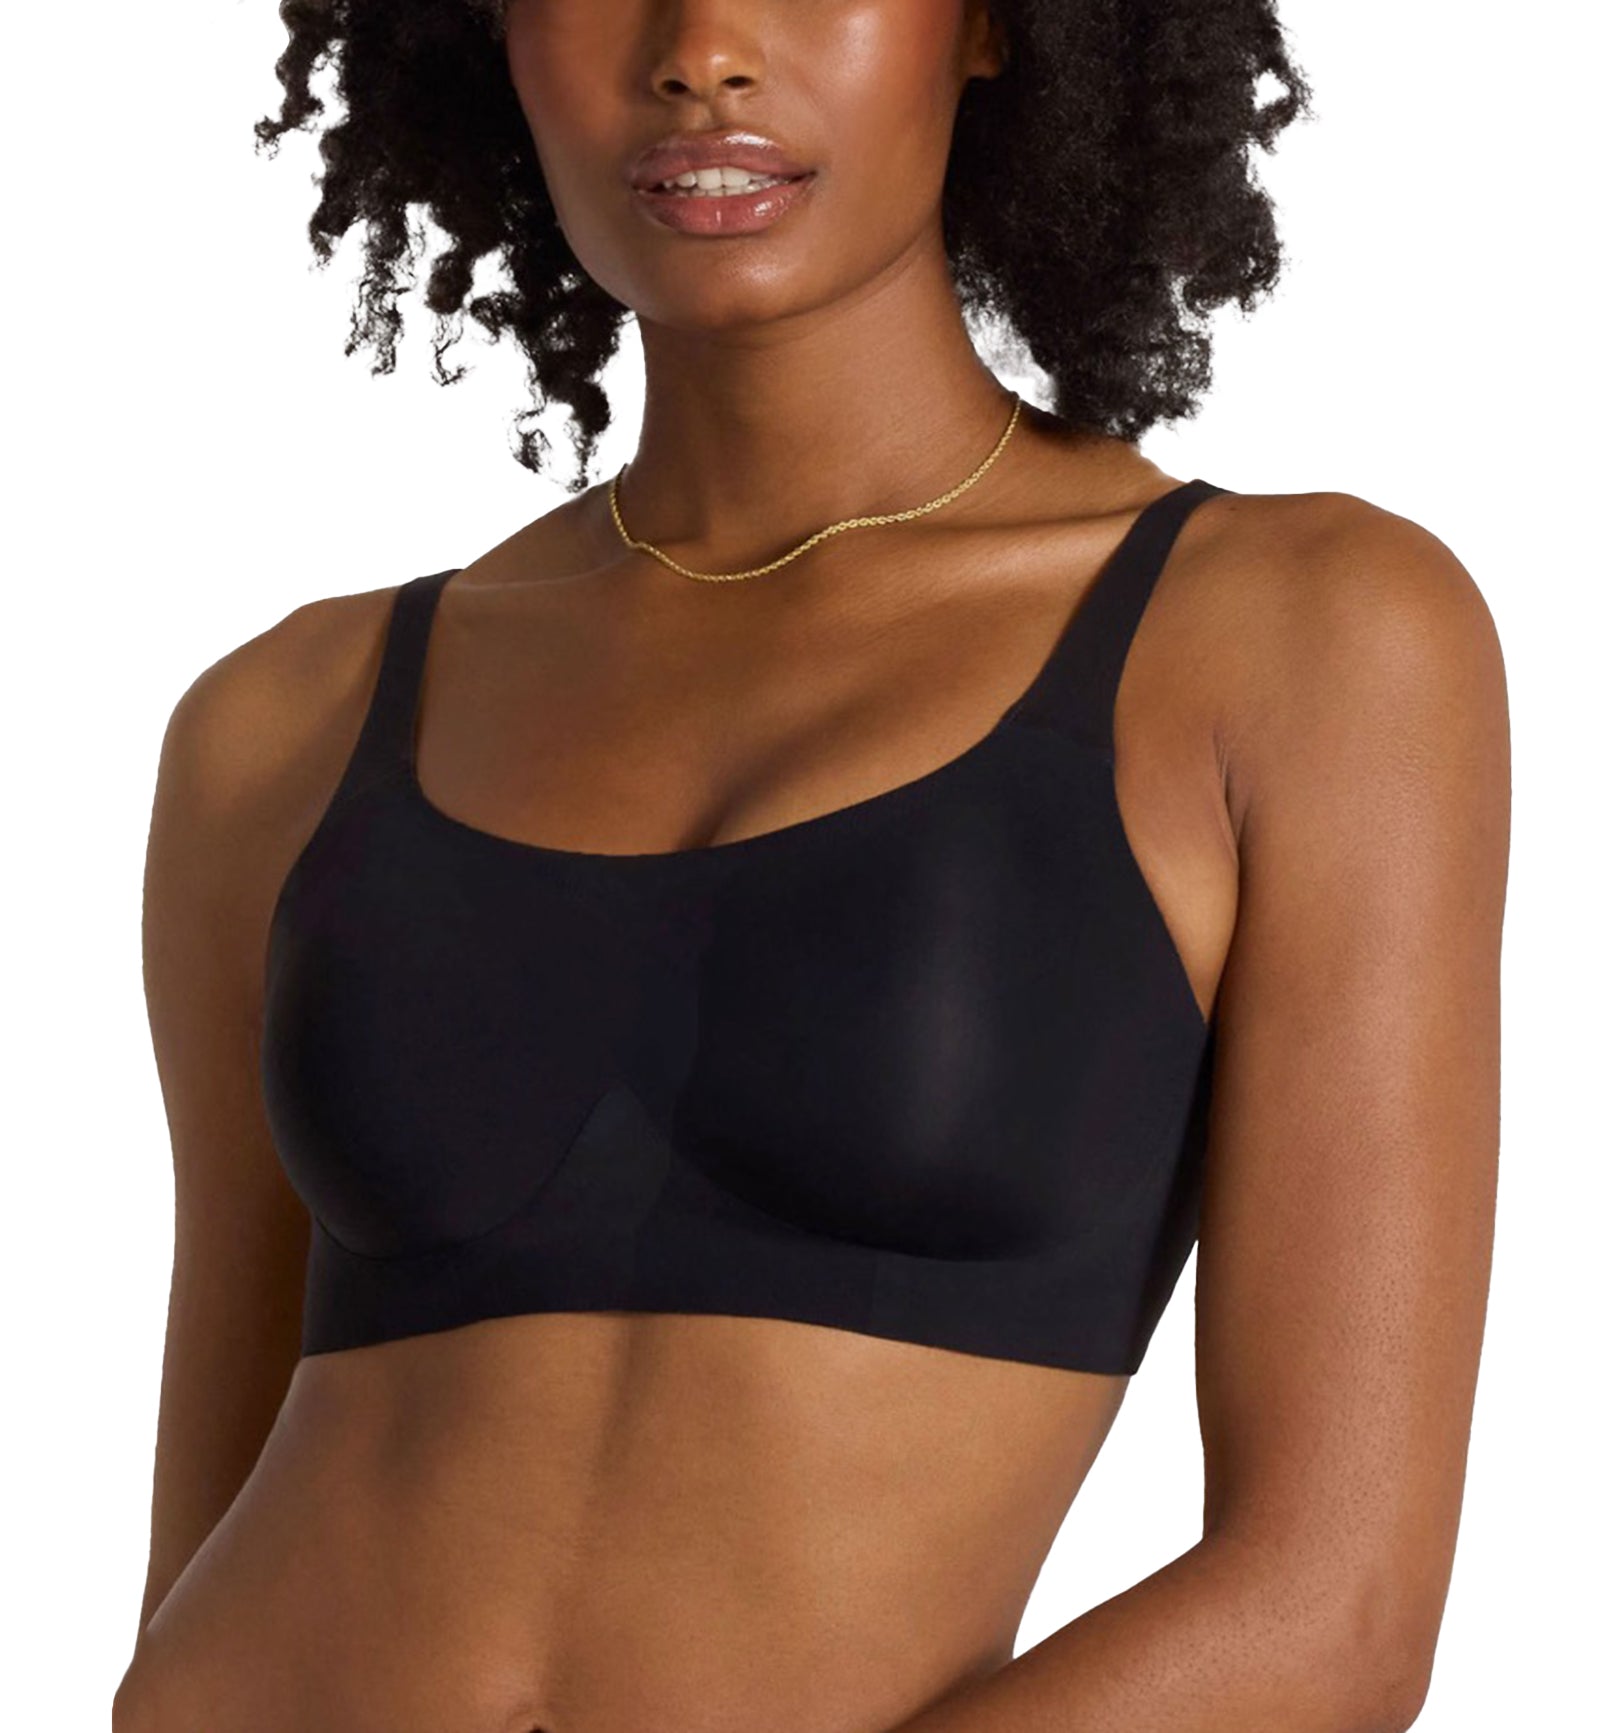 Evelyn & Bobbie STRUCTURED SCOOP Bralette (1801),Small,Black - Black,Small